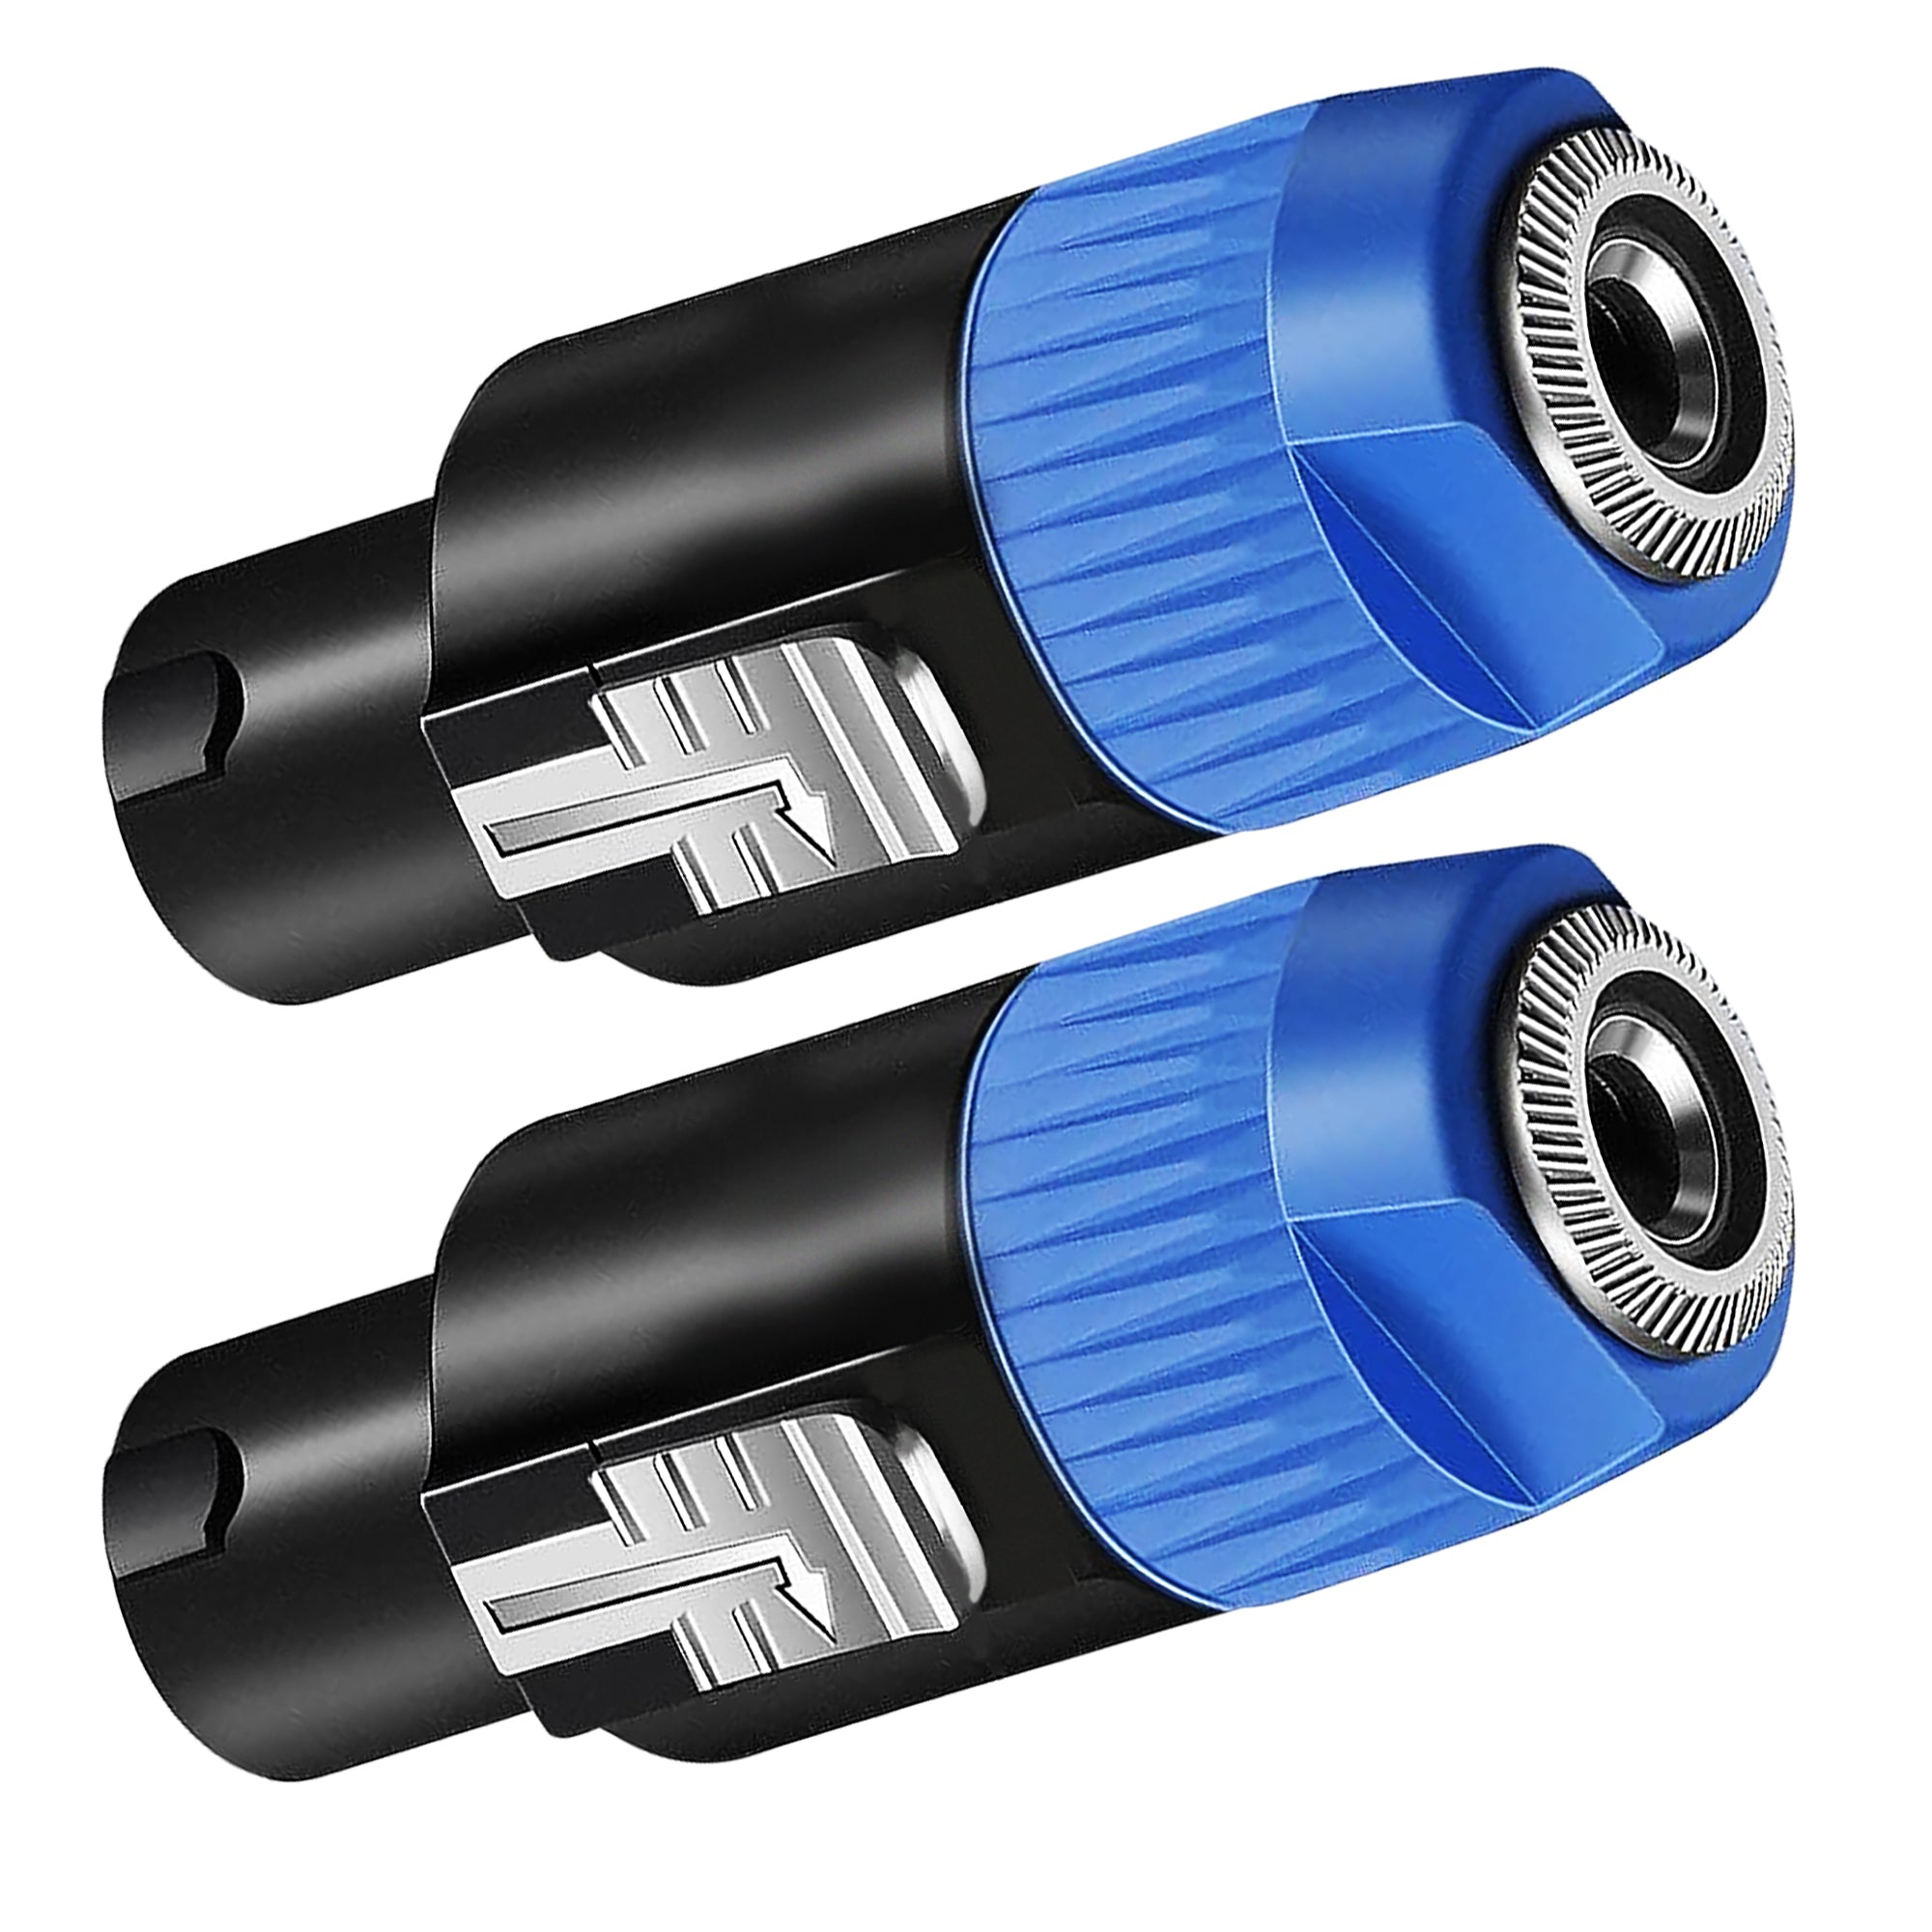 5 Core 2Pcs Speakon To 1/4 Adapter Connector, Upgraded 1/4 Female To Male Connector Speaker SPKN ADP 2PCS